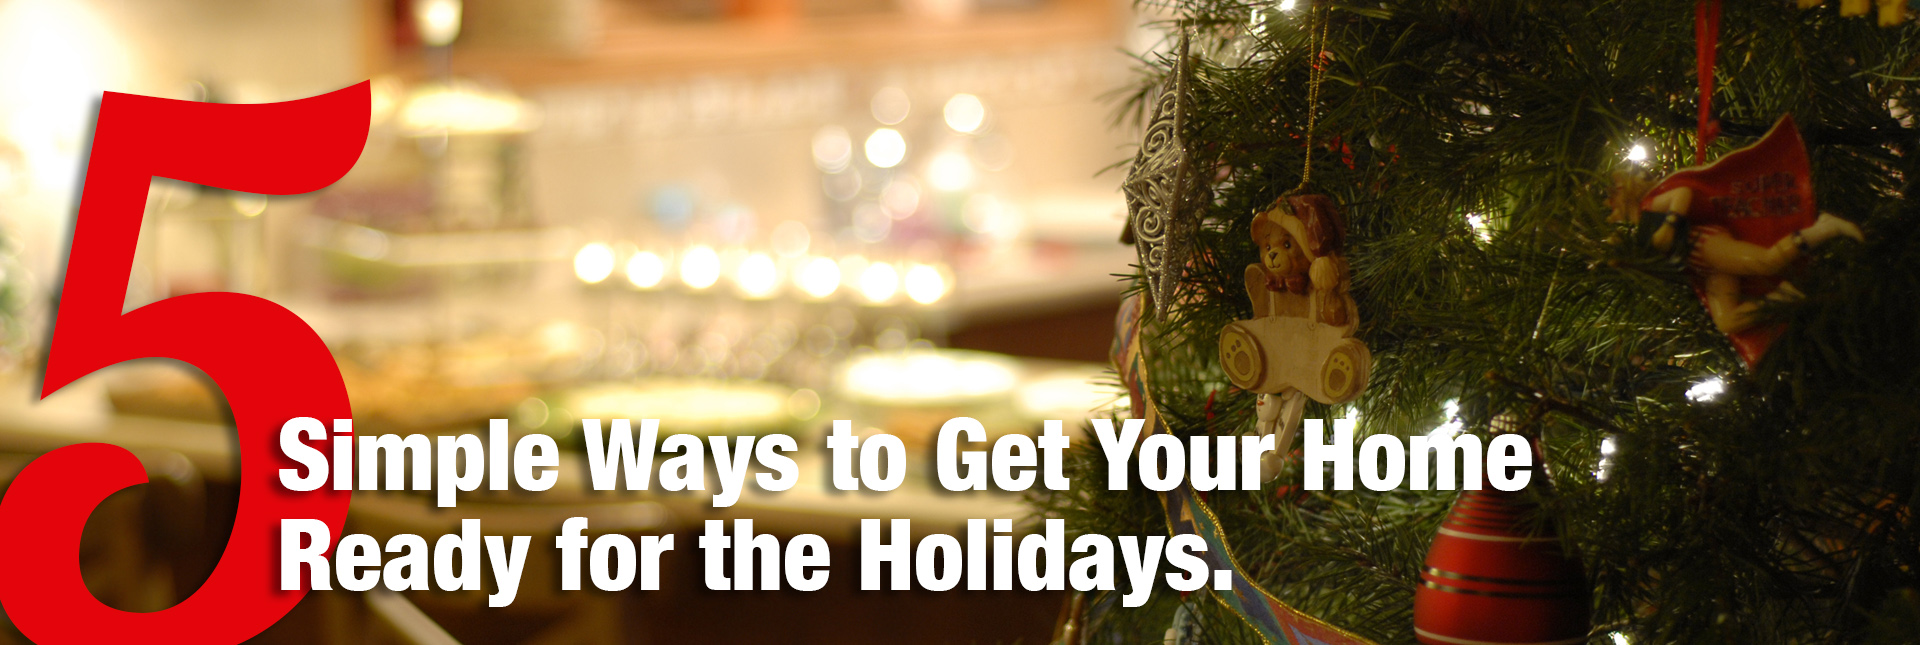 5 Simple Ways to Get Your Home Ready for the Holidays - Danco